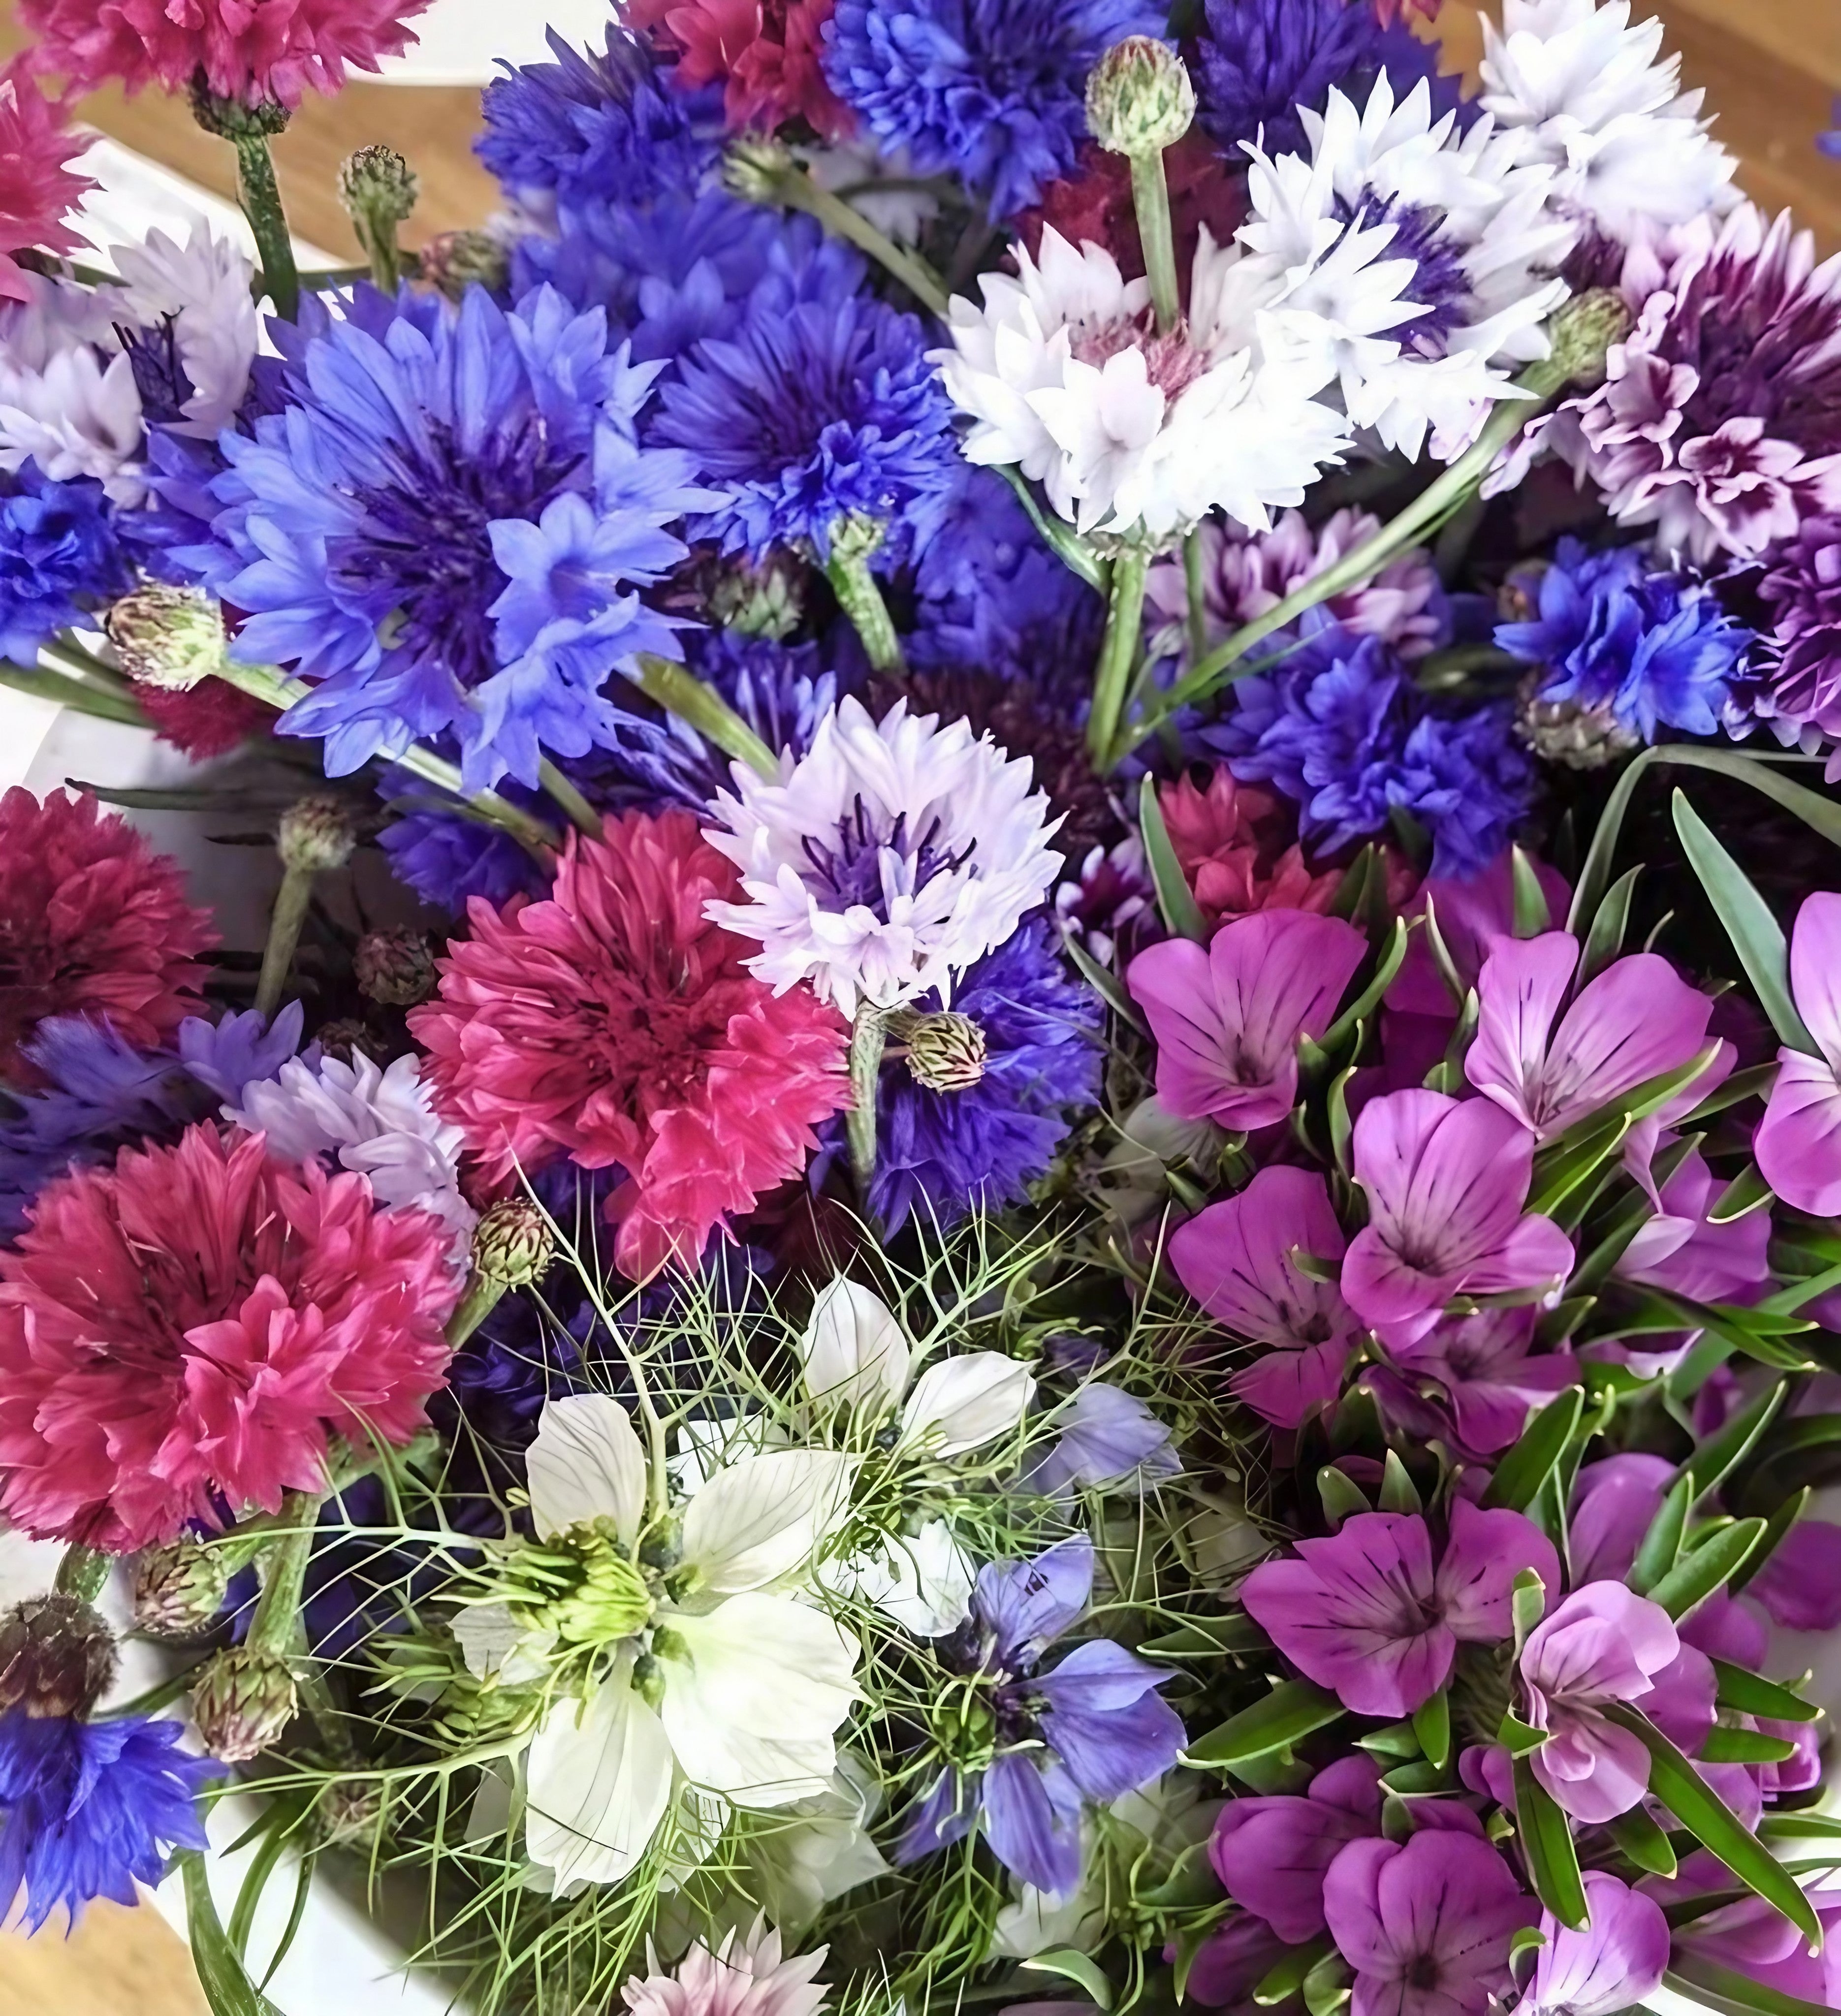 Close-up of Cornflower Polka Dot Mixed flowers in shades of purple and white